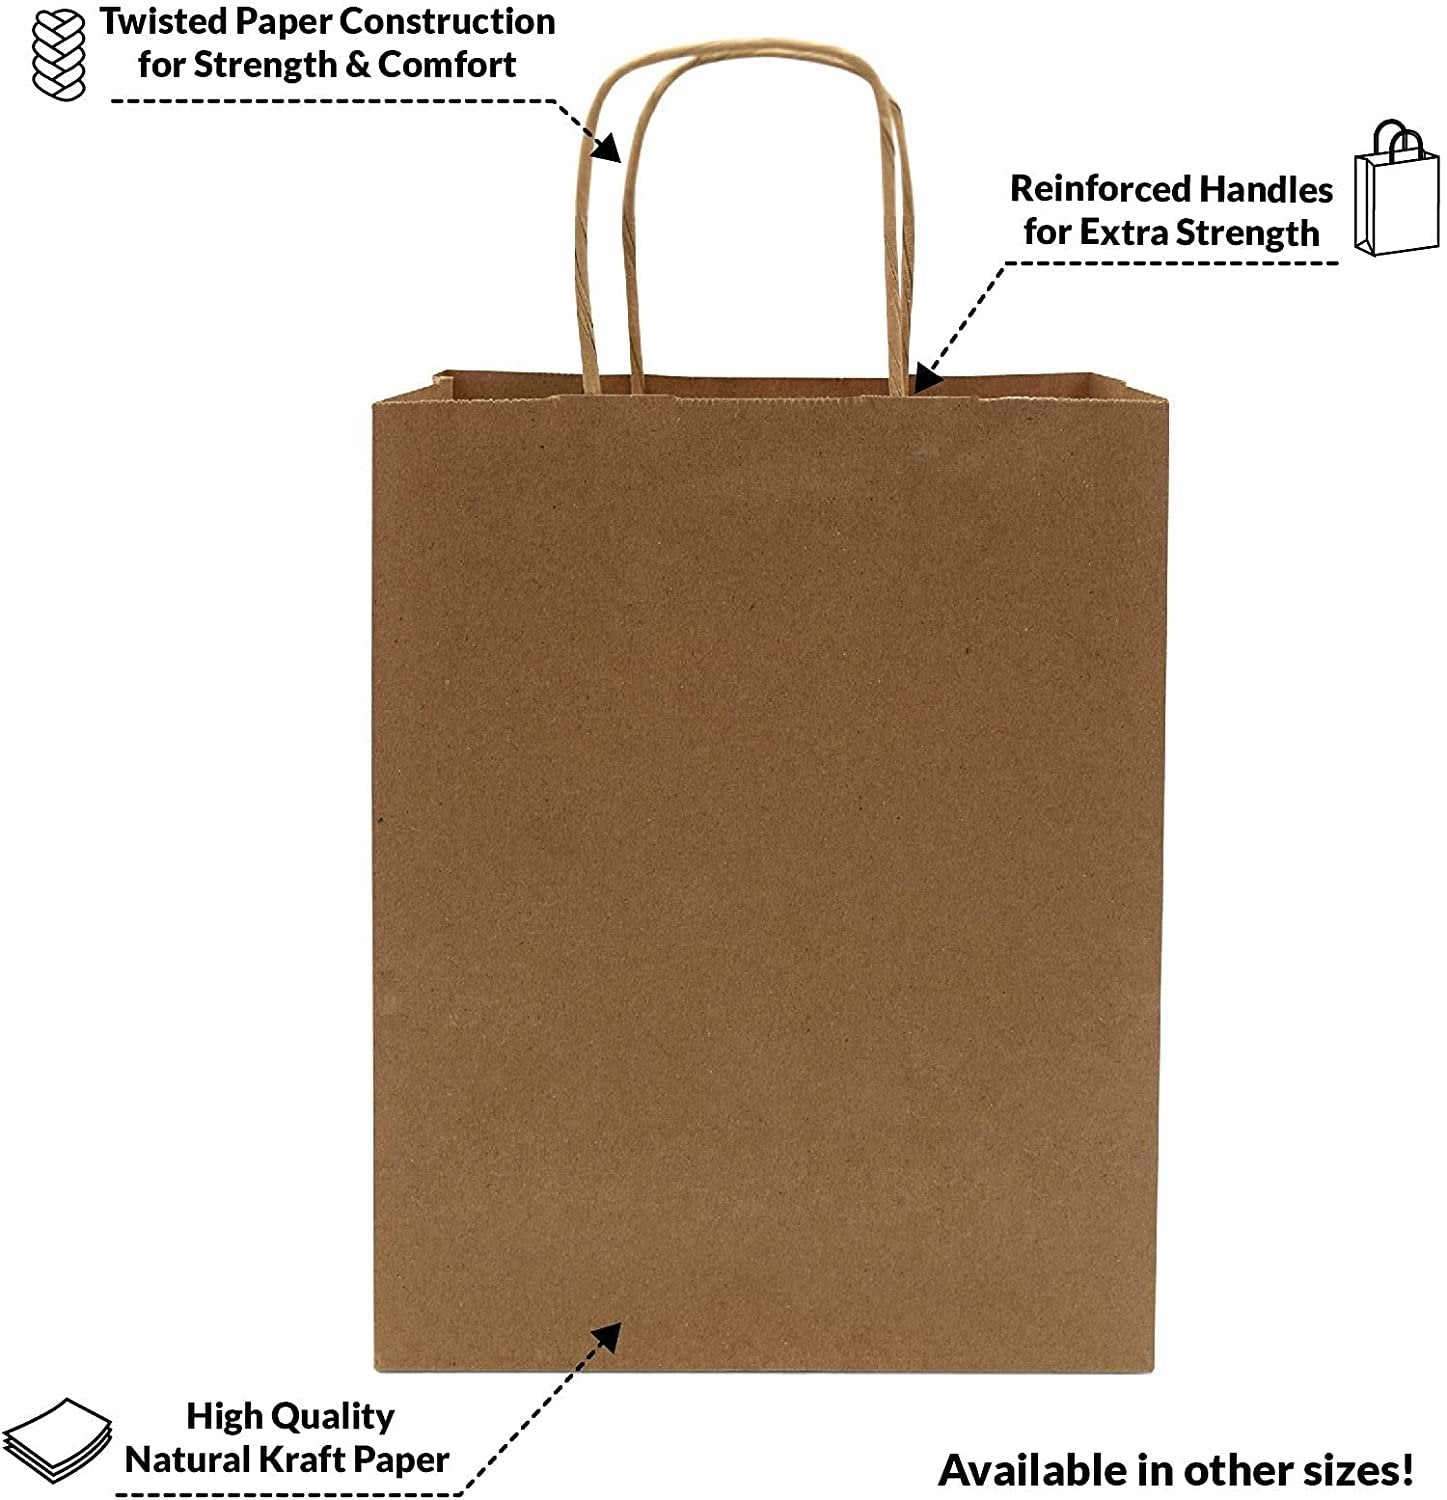 Prime Line Packaging Brown Kraft Paper Bags, 100 Count 8x4x10 Inch with Handles - Ideal for Small Business, Retail Stores, Gifts & Merchandise